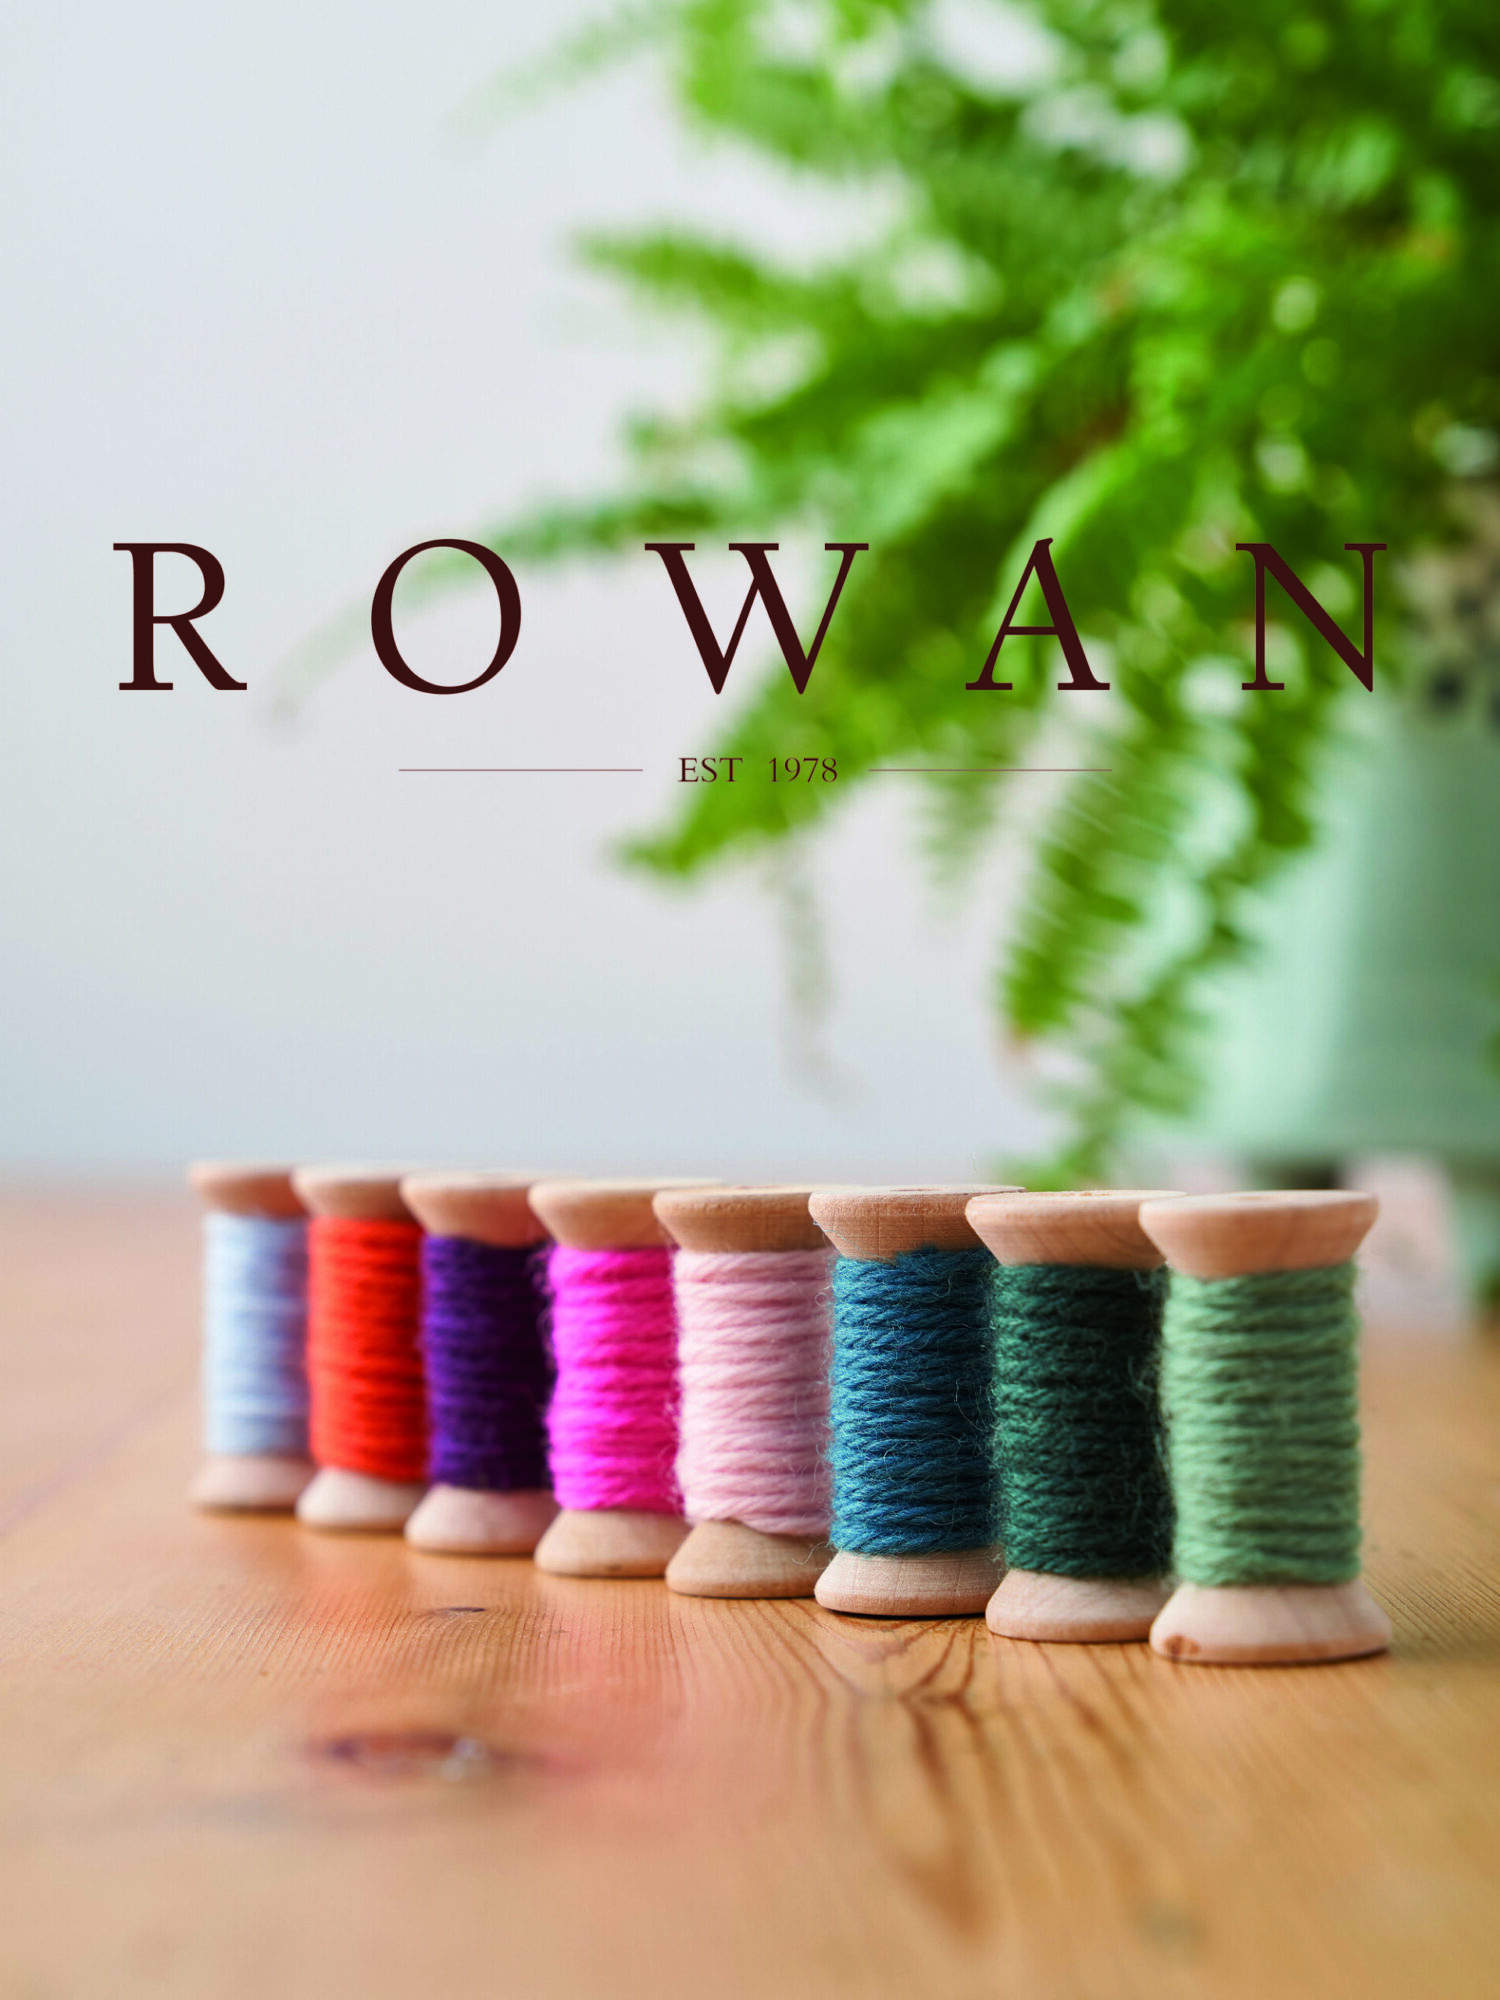 Rowan has arrived! featured image